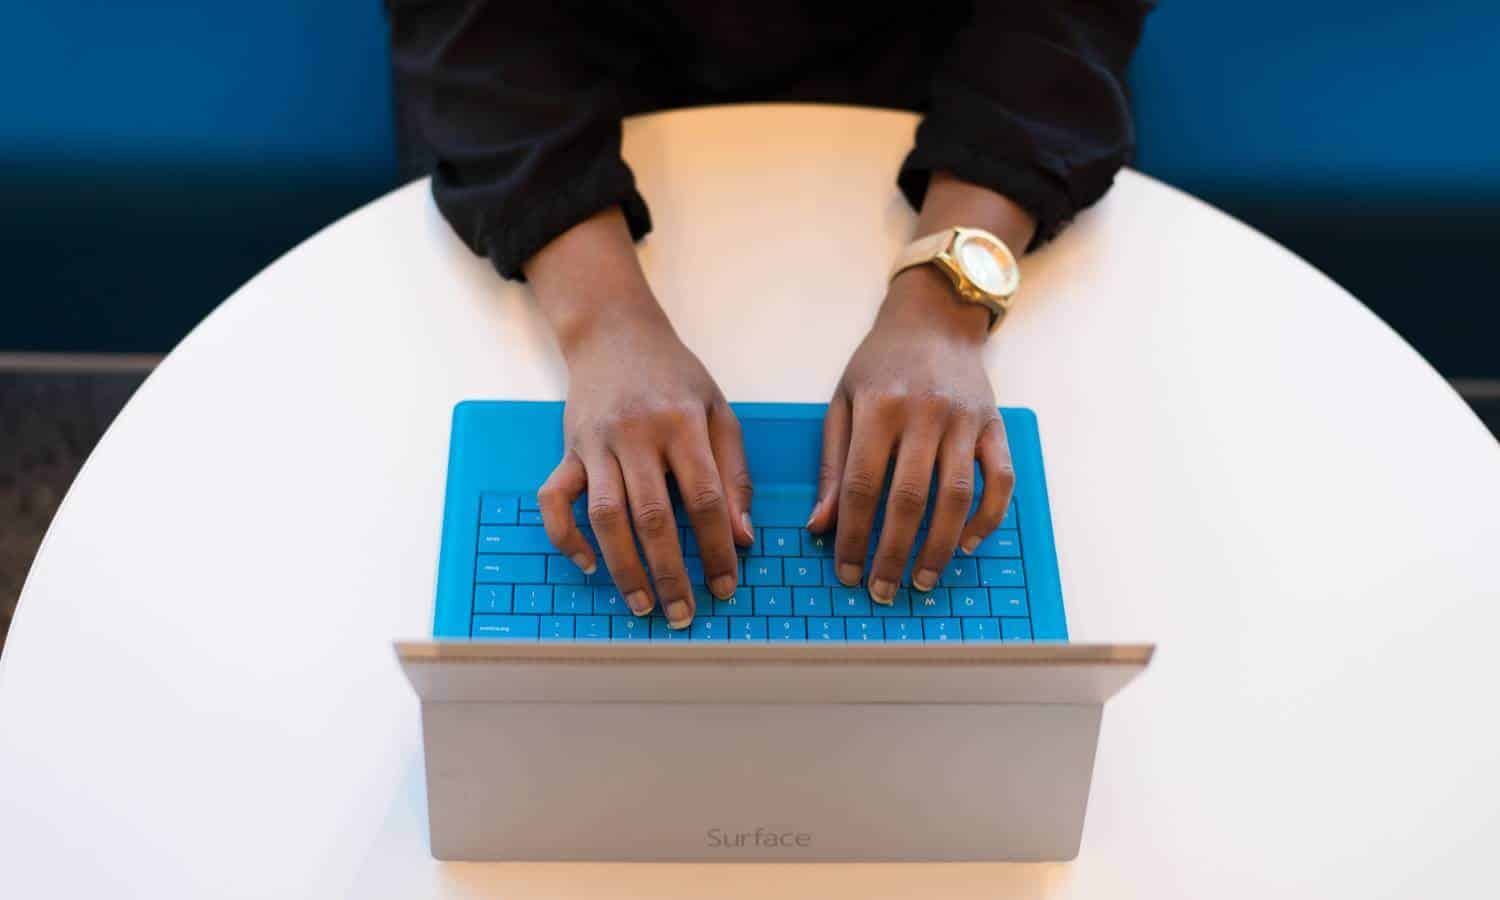 Person typing on blue keyboard to access an addiction treatment virtual support group